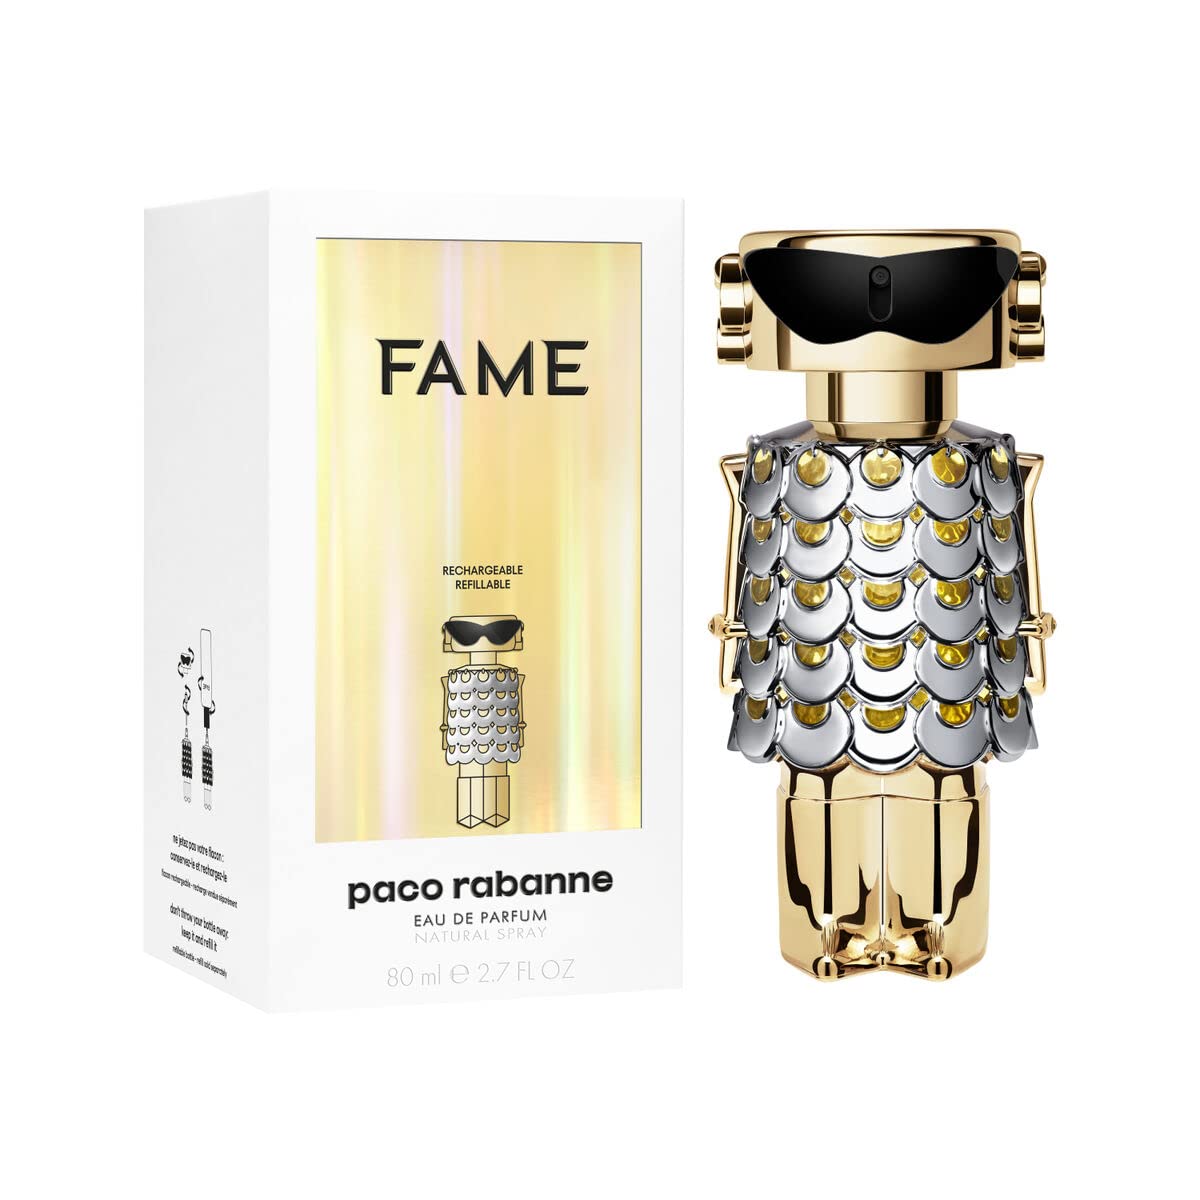 Fame by Paco Rabanne 2.7 oz EDP Spray for Women